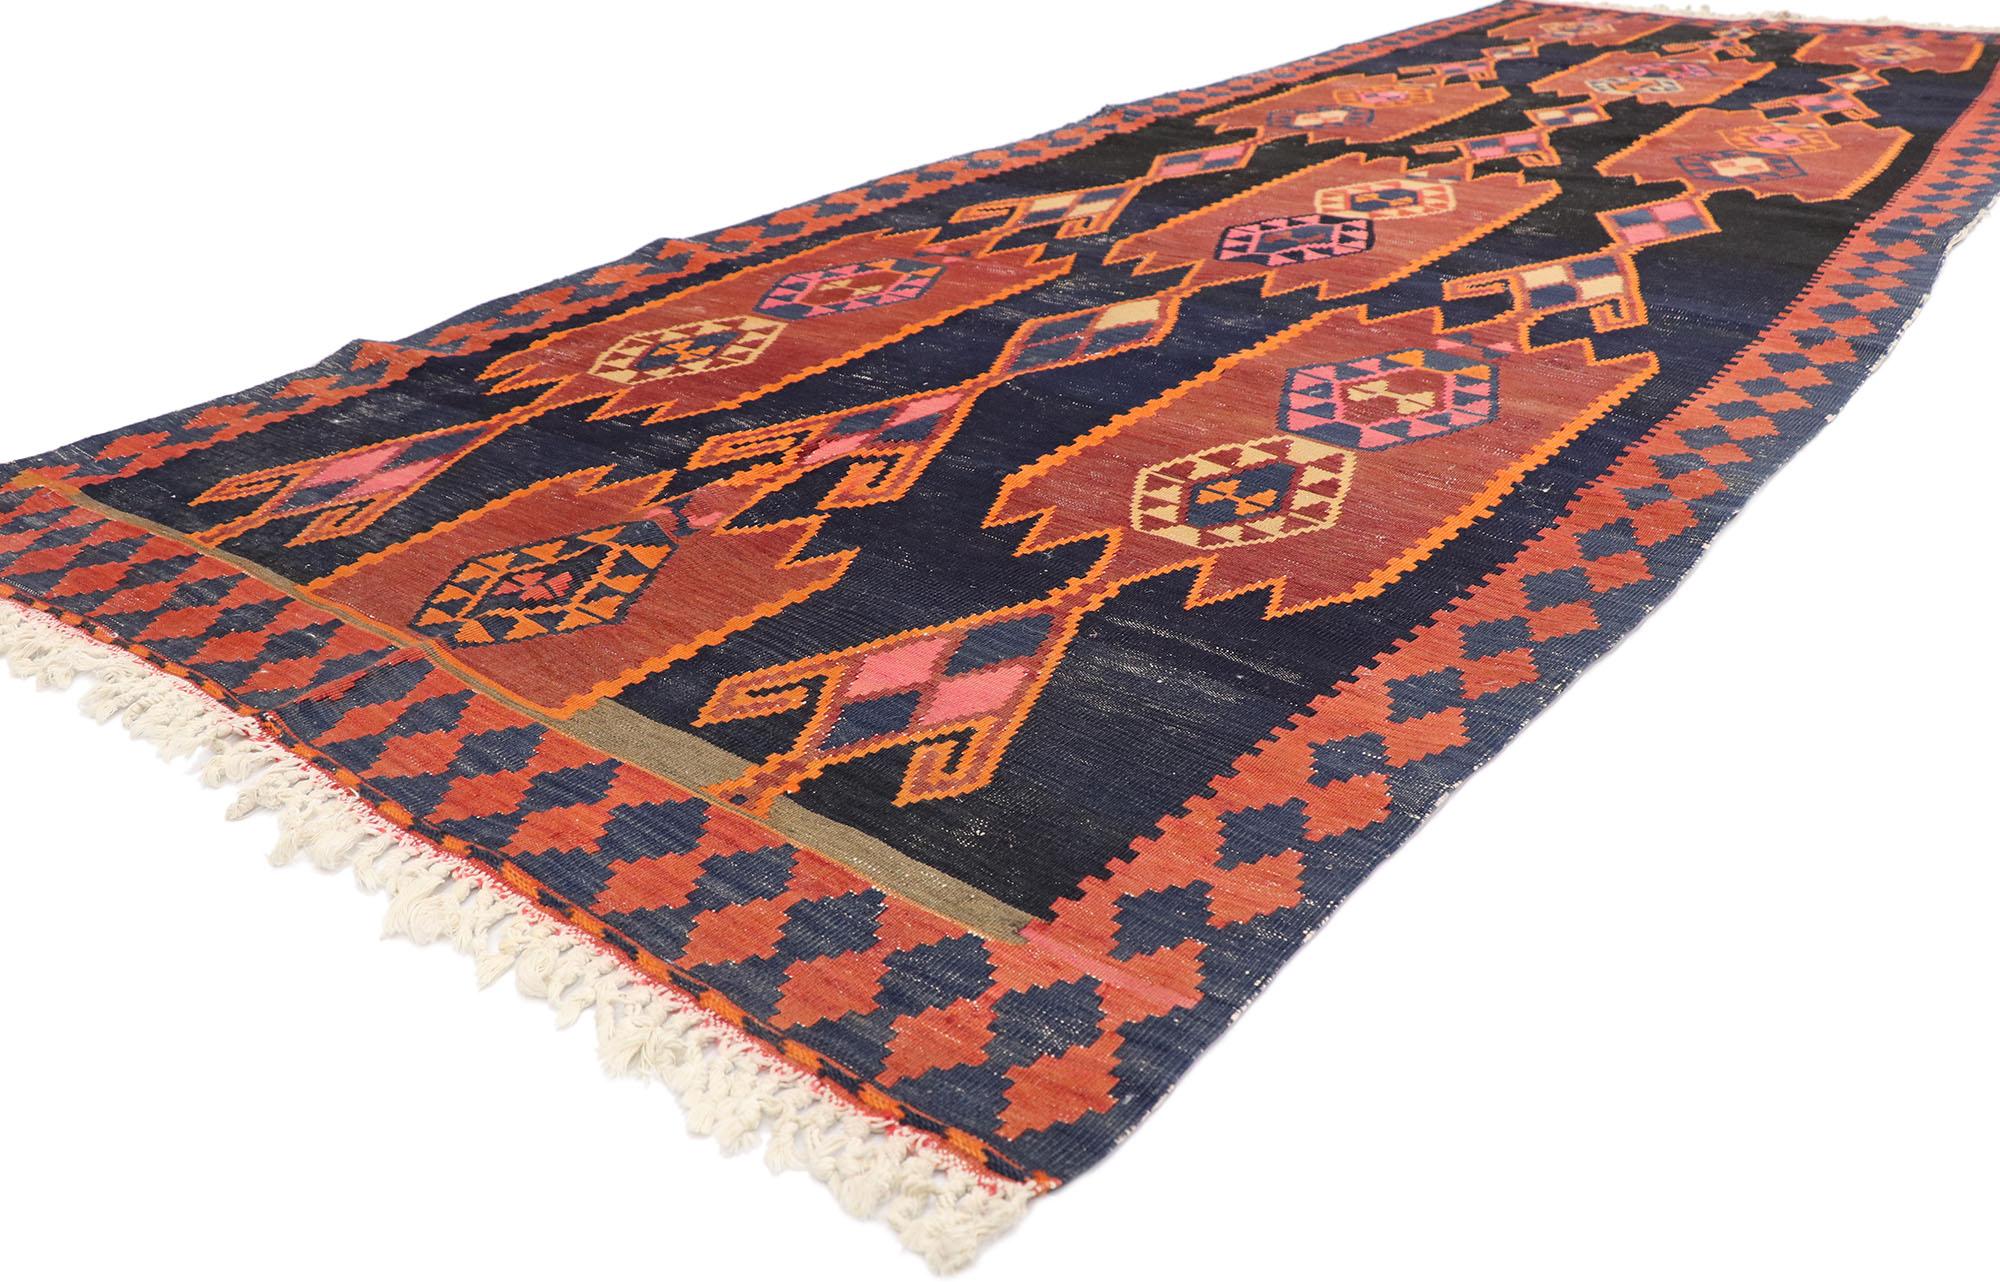 77967 Vintage Persian Azerbaijan Kilim Rug, 04'09 x 13'08. Introducing a masterpiece of textile artistry, this handwoven wool Persian Azerbaijan kilim rug hails from the rich heritage of northwestern Iran. Immerse your space in a bold Southwestern